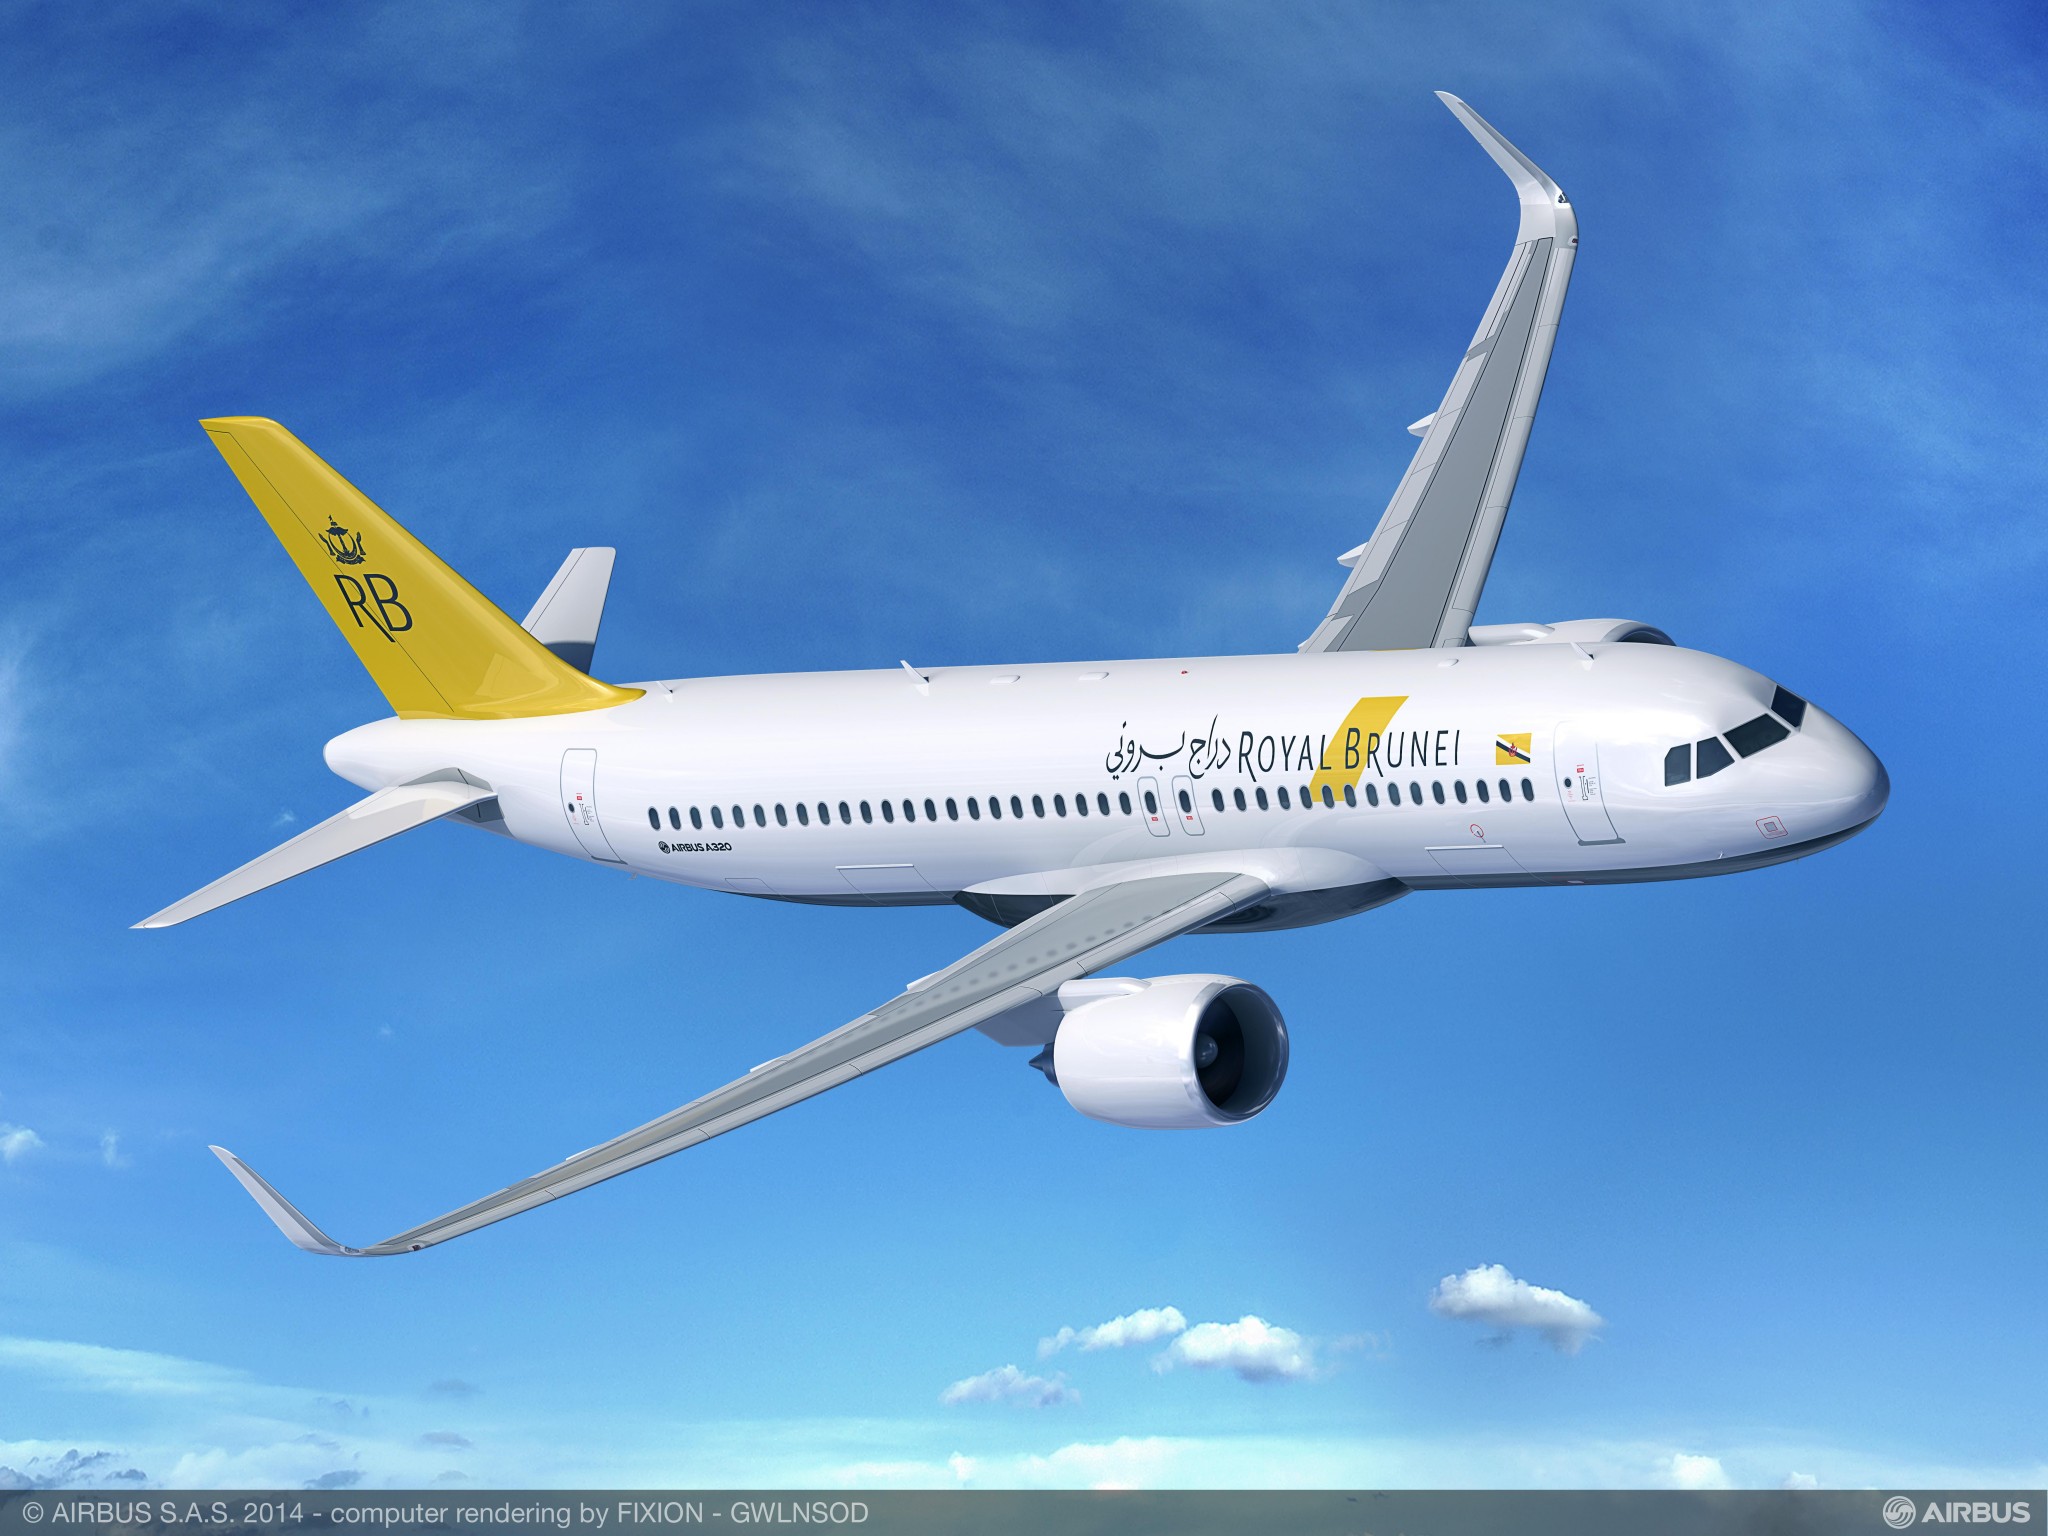 Royal Brunei Airlines to fly daily non-stop to Heathrow